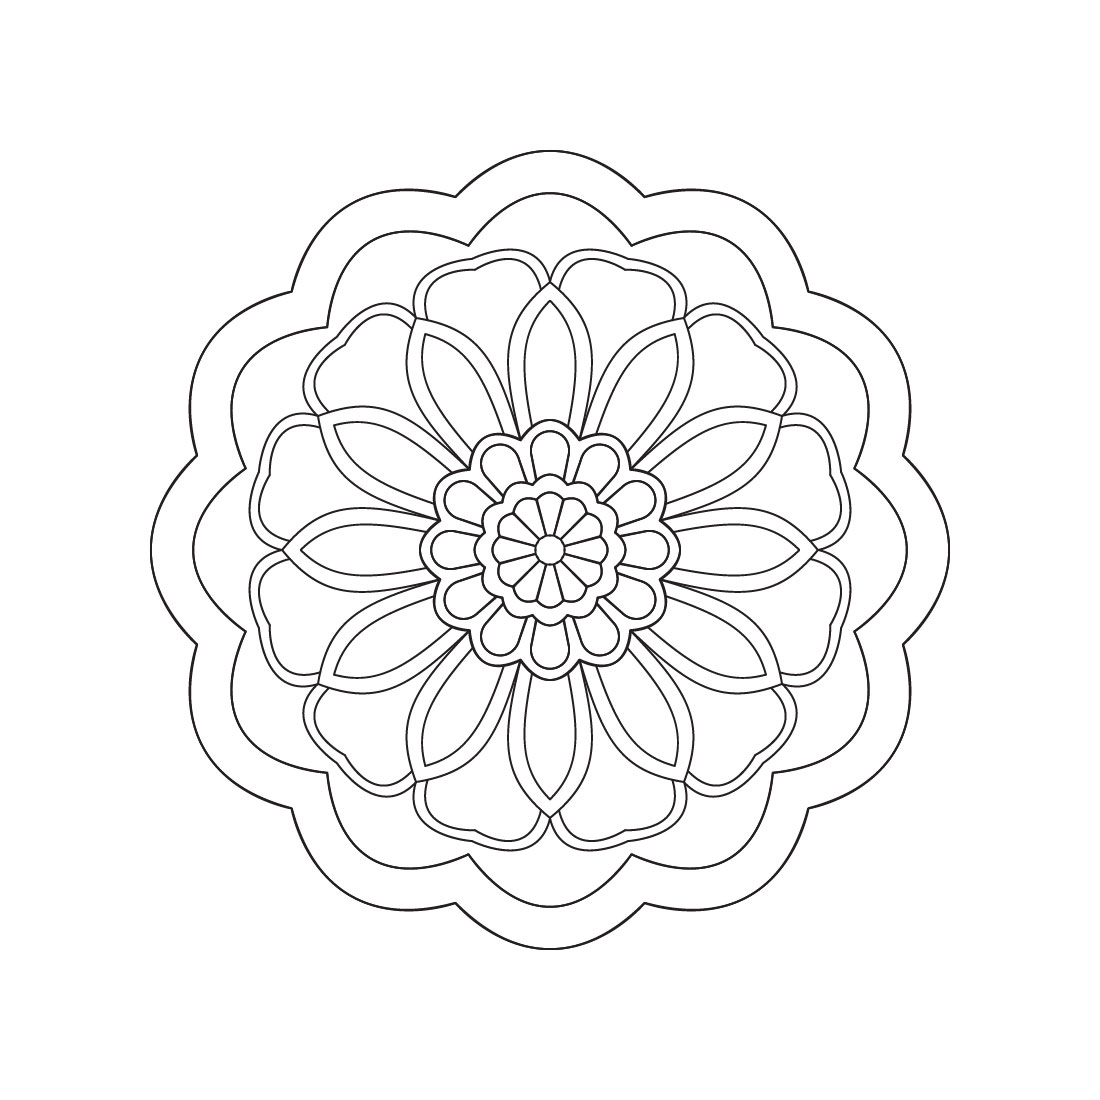 Bundle of 10 Floral Fusion Mandala for KDP Coloring Book interior Pages preview image.